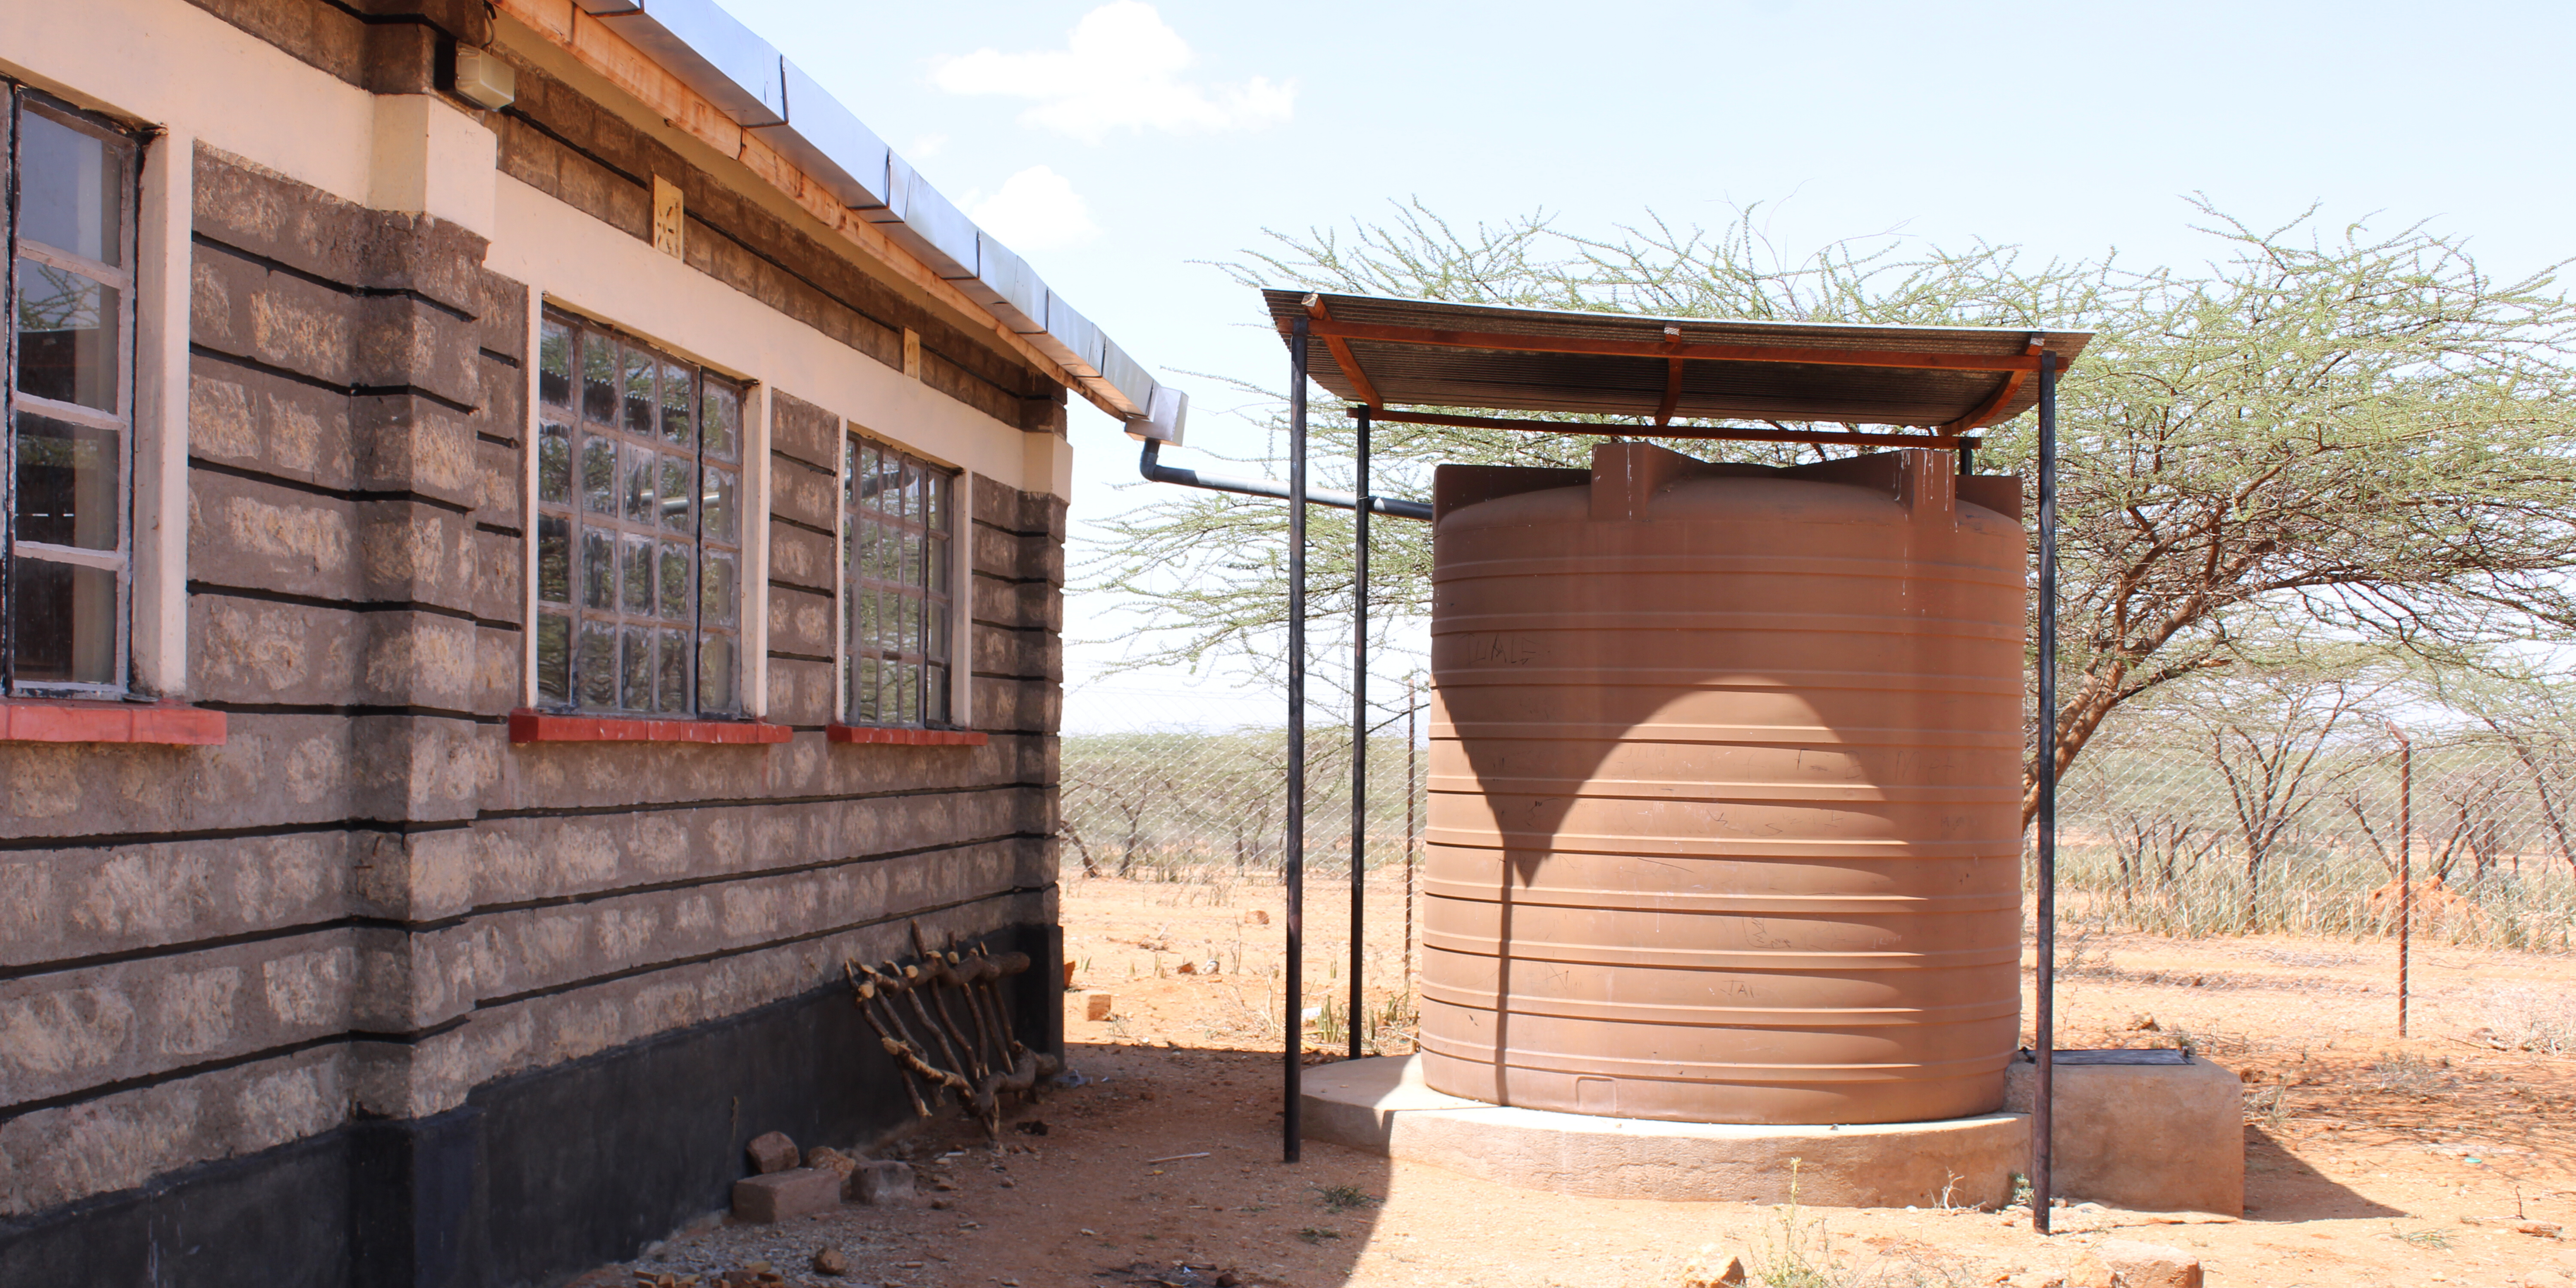 Water system at Tuale Primary